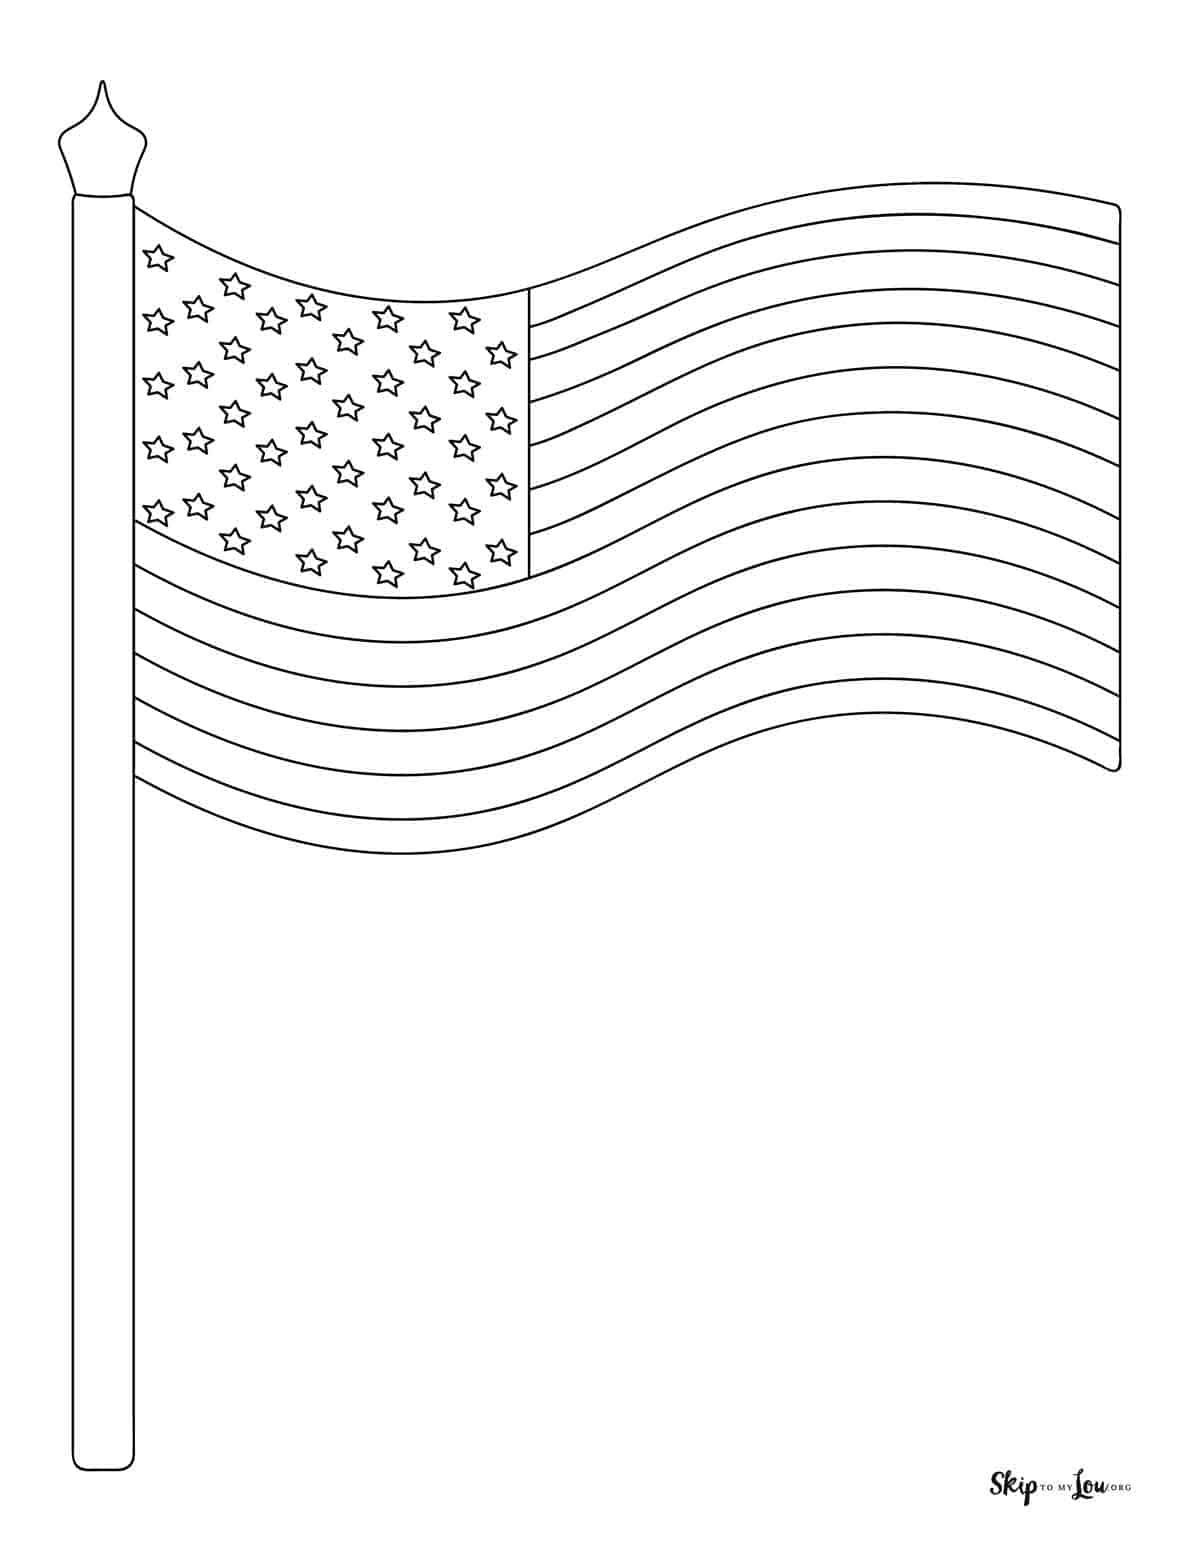 wind blown American flag on pole coloring page